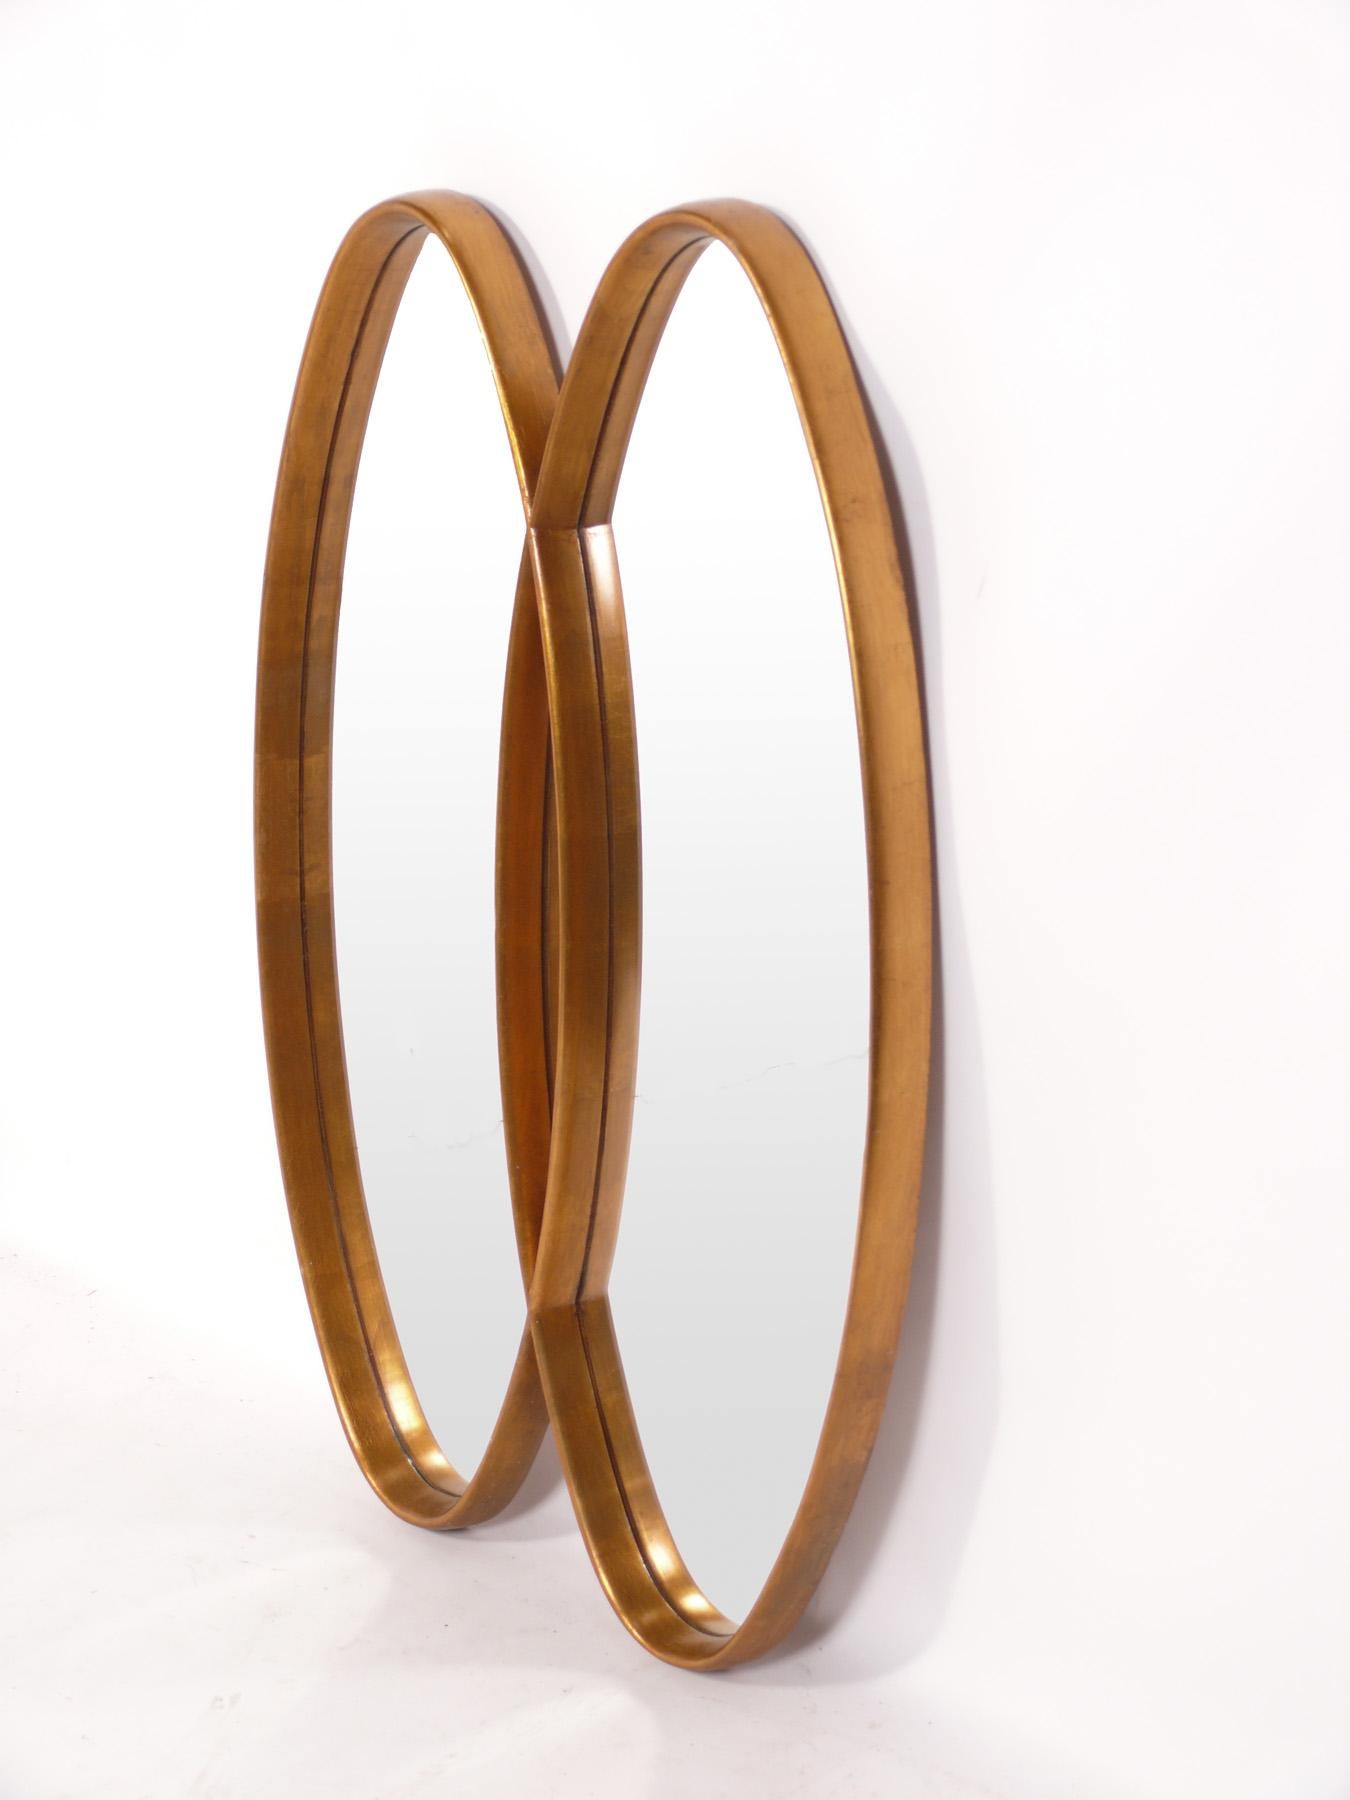 Sculptural double oval gilt mirror, American, circa 1960s. This mirror has a sculptural form and would fit seamlessly into a wide range of interiors, from traditional to ultra modern.